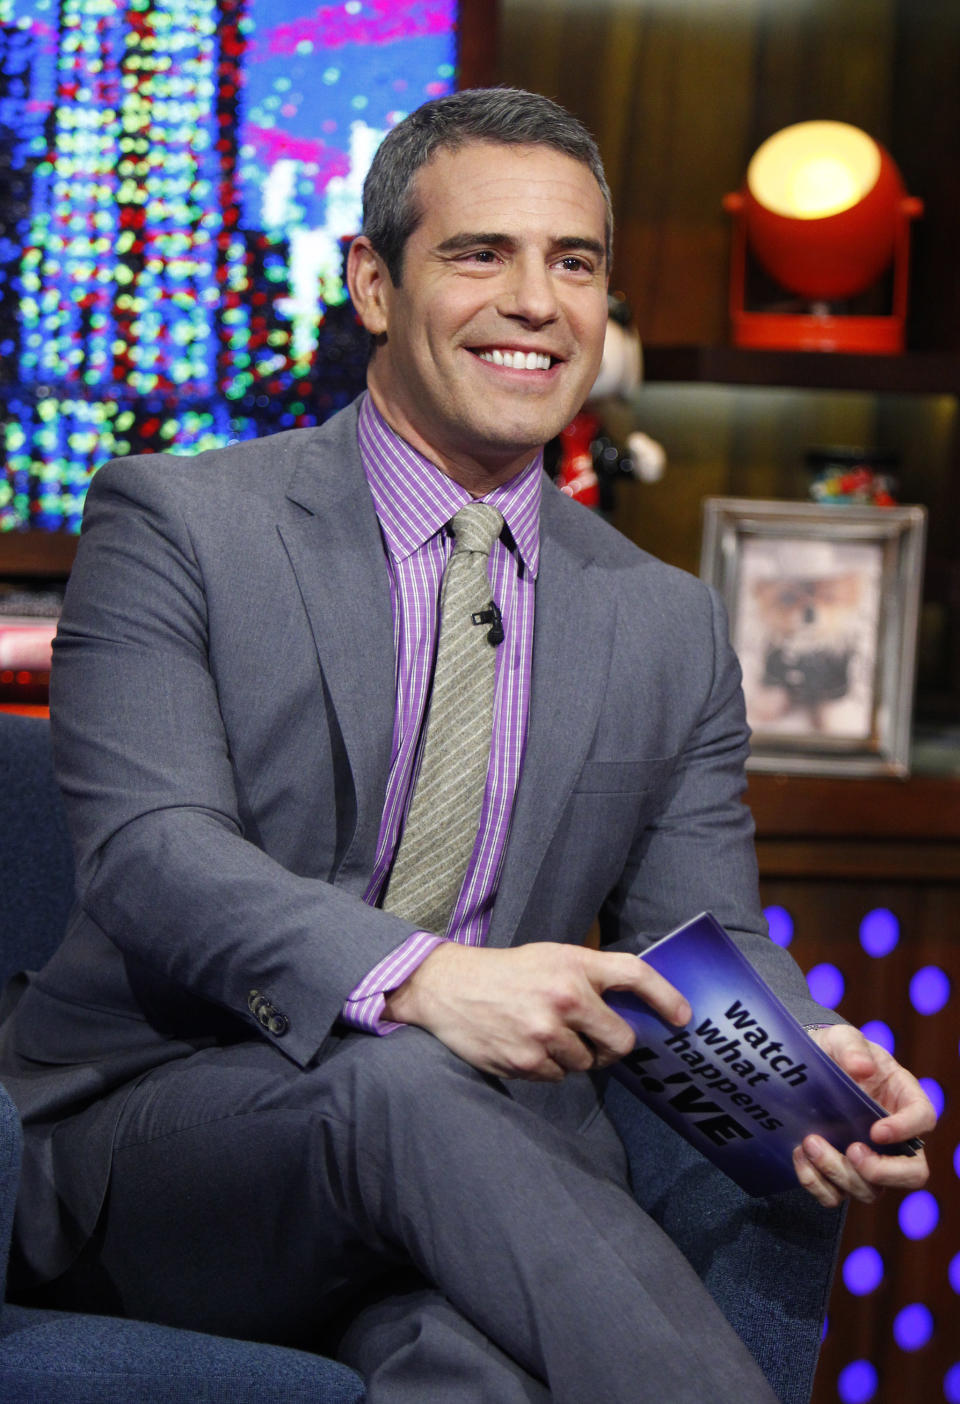 FILE - In this Jan. 9, 2012 file photo originally released by Bravo, host Andy Cohen appears on Bravo's "Watch What Happens Live" show in New York. Expanding to five nights a week this past January, "WWHL" has grown from two nights a week, and before that one night, and before that a blog Cohen posted about the shows he stewarded in his executive day job. (AP Photo/Bravo, Peter Kramer)